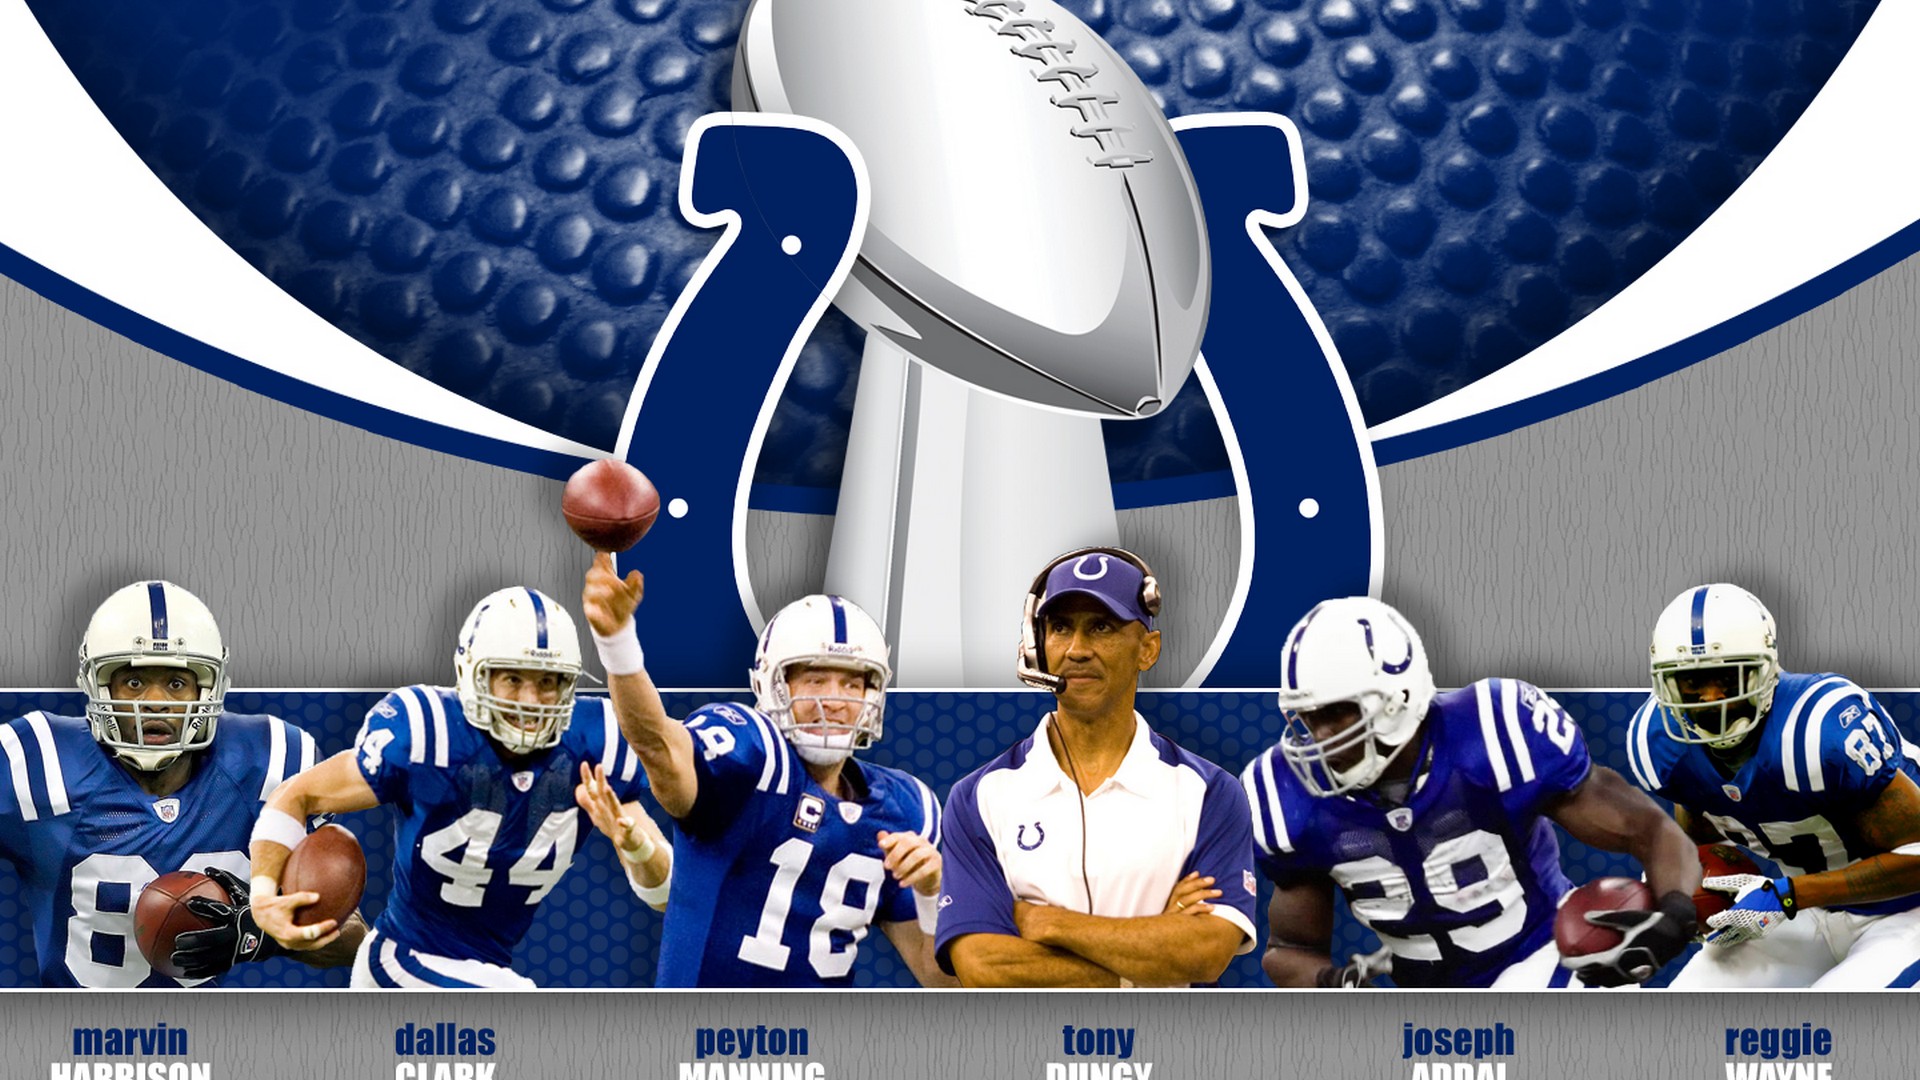 Indianapolis Colts NFL Backgrounds HD With Resolution 1920X1080 pixel. You can make this wallpaper for your Mac or Windows Desktop Background, iPhone, Android or Tablet and another Smartphone device for free